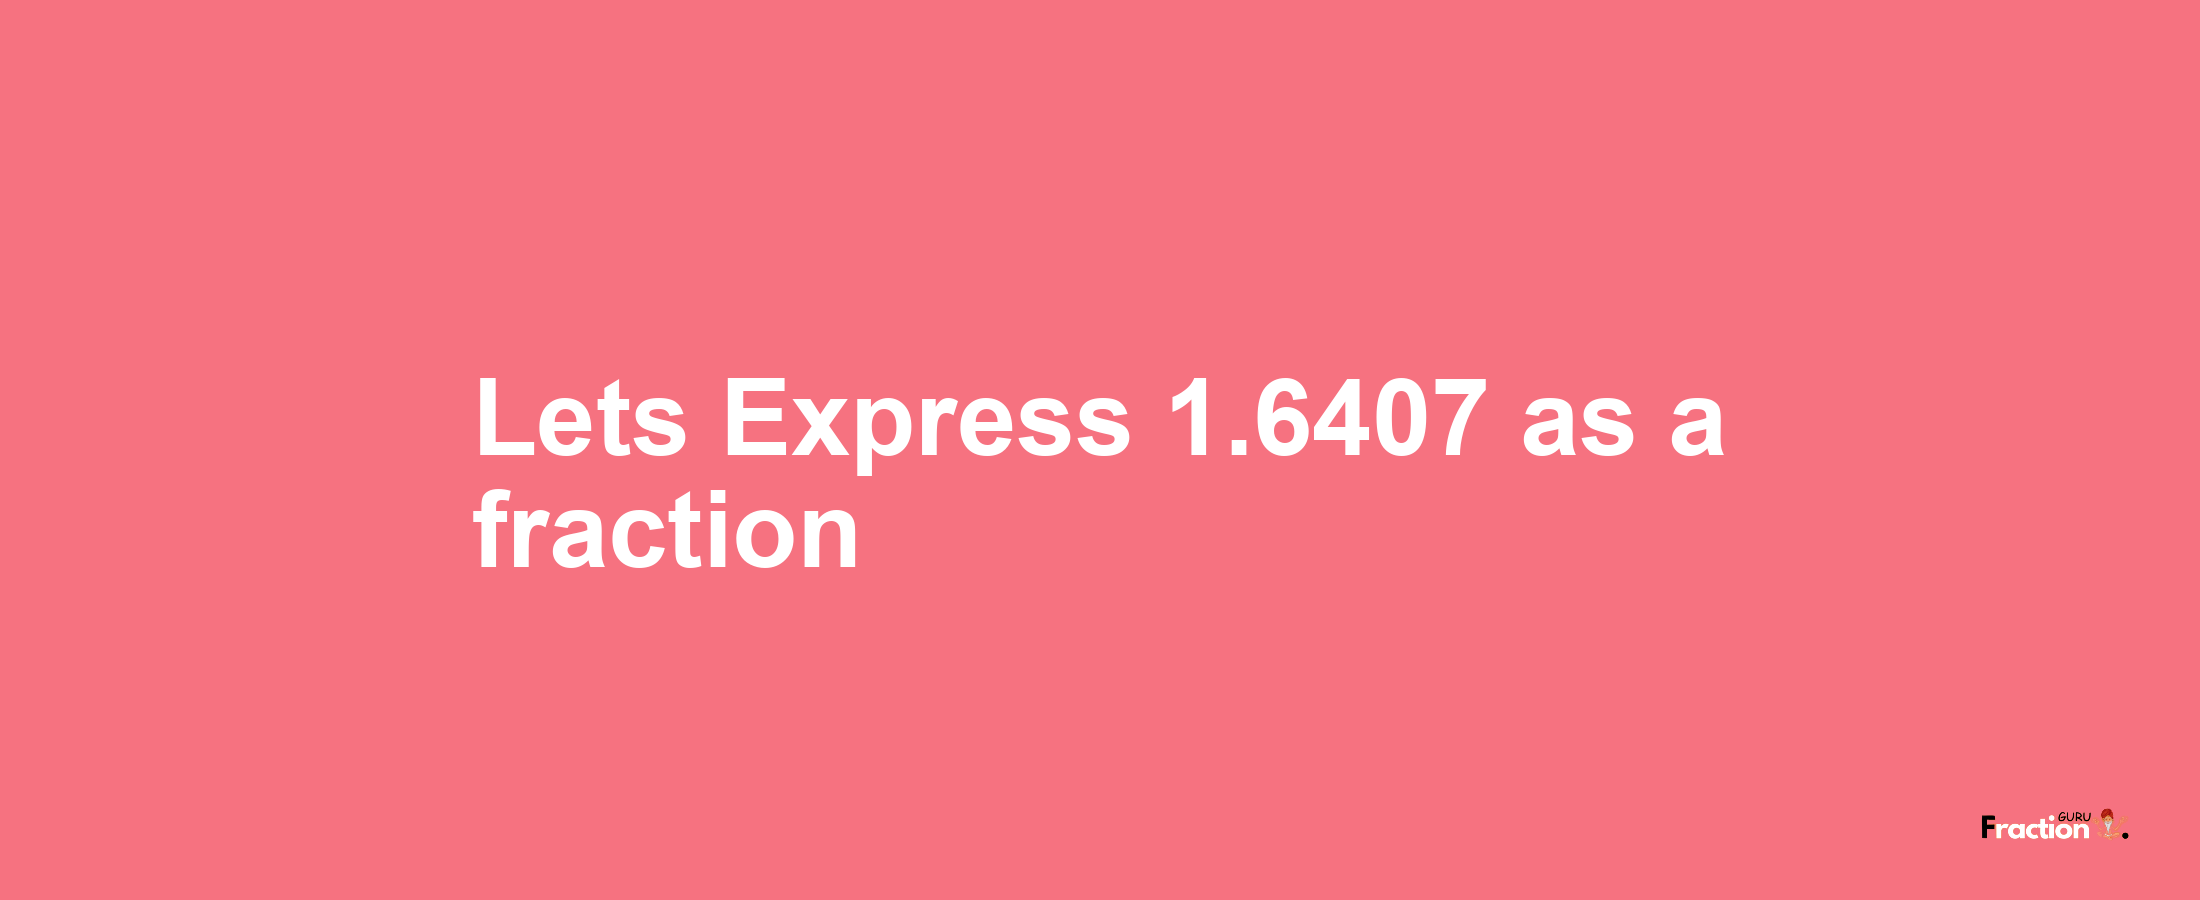 Lets Express 1.6407 as afraction